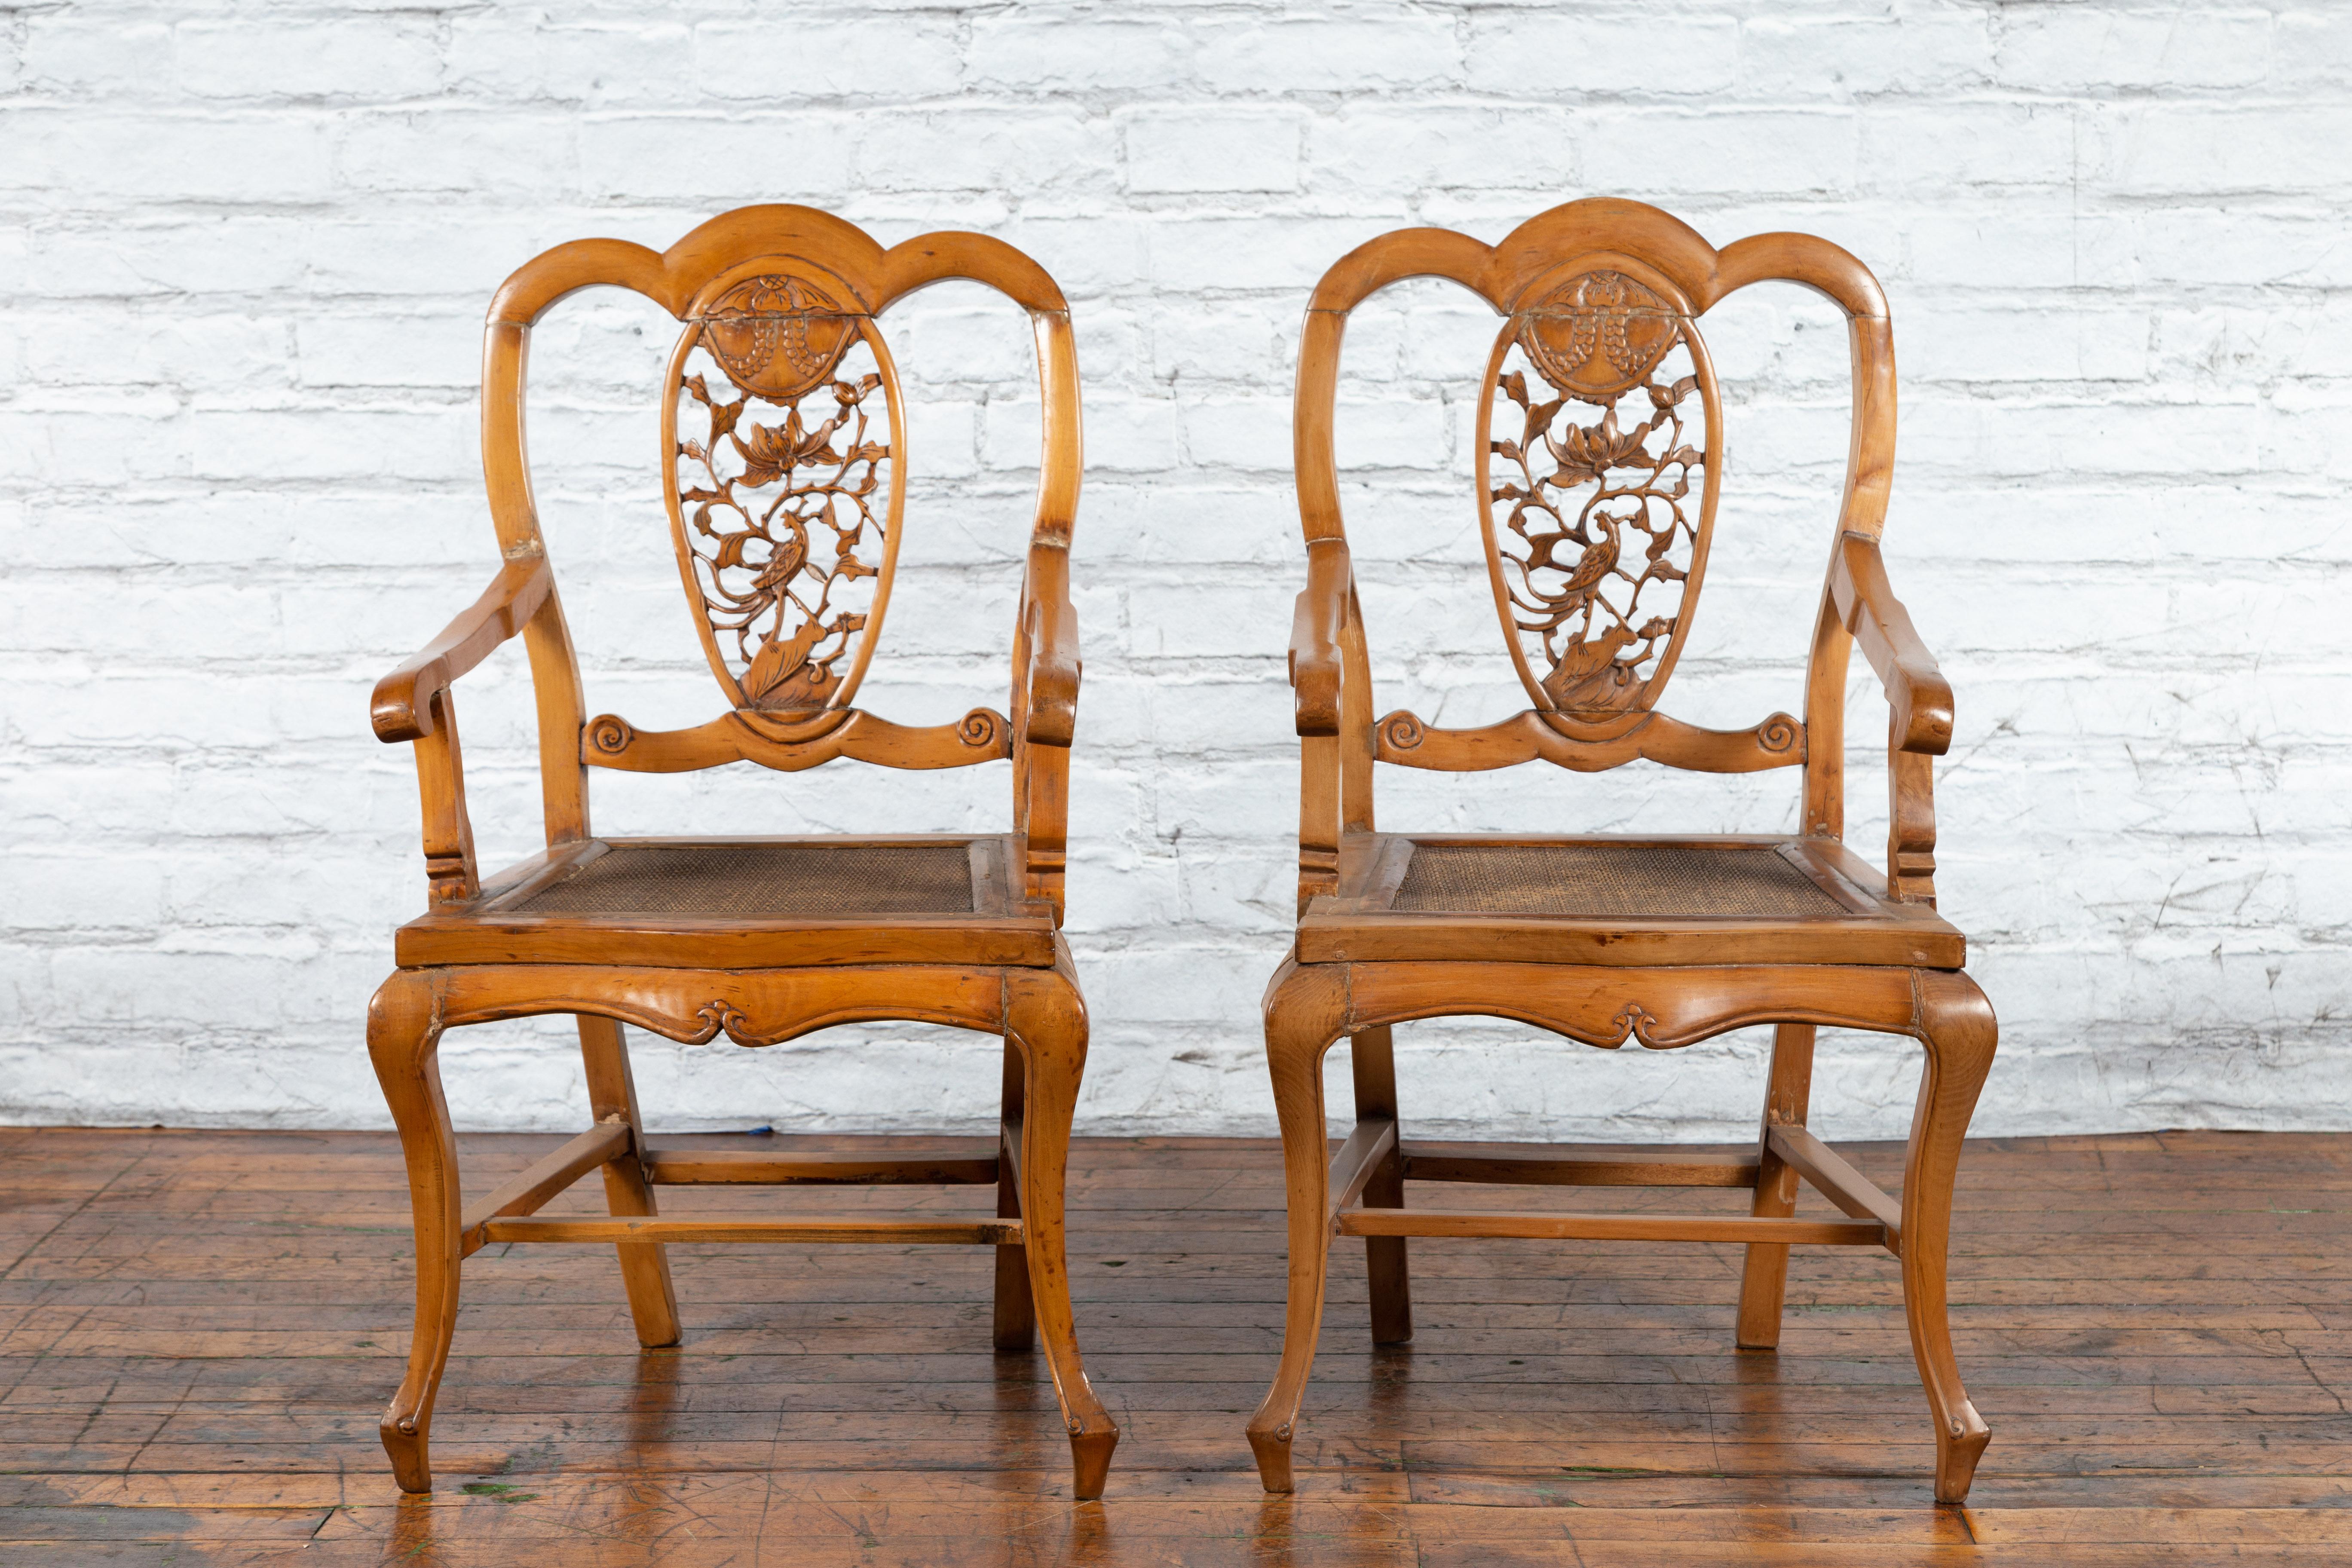 Two Chinese Qing Dynasty period carved wooden armchairs from the 19th century with hand-carved medallion, priced and sold each. Created in China during the Qing Dynasty period, each chair features a carved splat adorned with a hand-carved oval